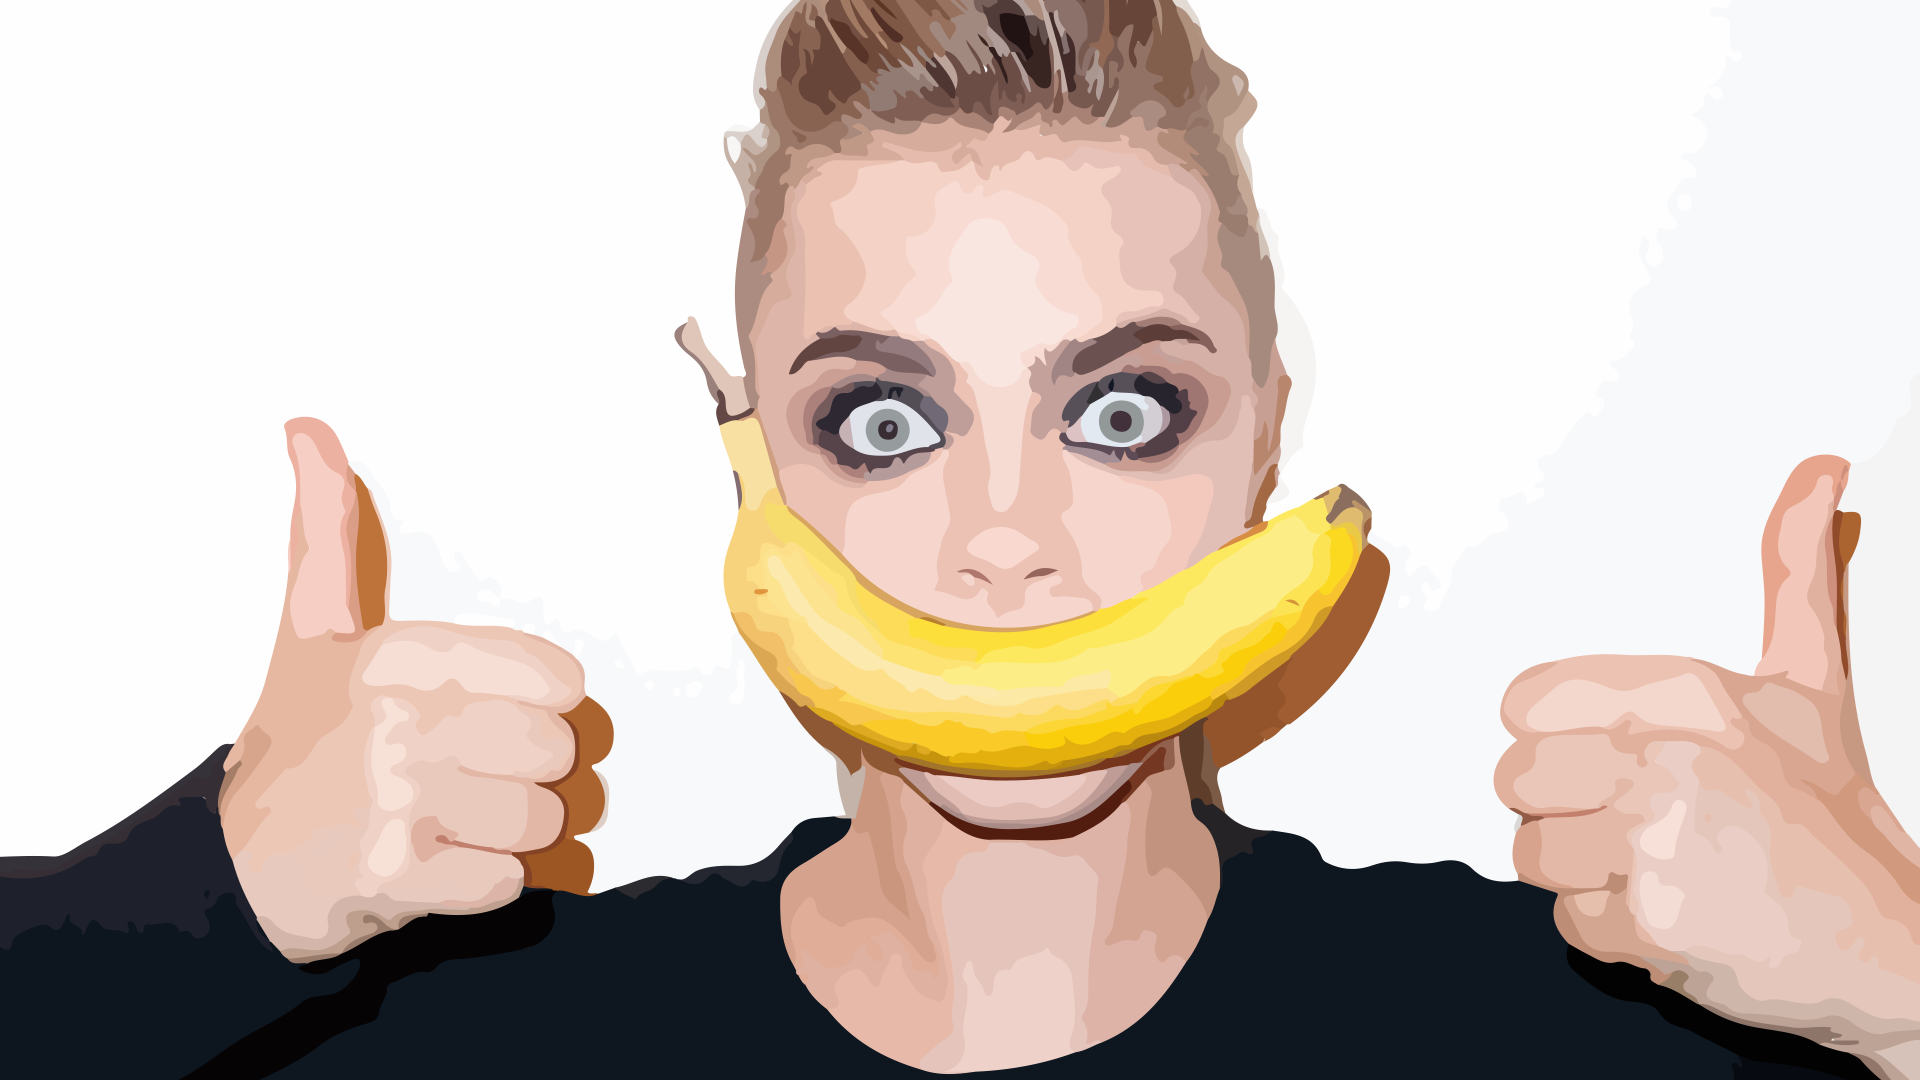 People 1920x1080 Cara Delevingne Terry Richardson artwork digital art vector art women model actress British women British model face portrait wacky food fruit bananas hand gesture thumbs up white background simple background looking at viewer photoshopped